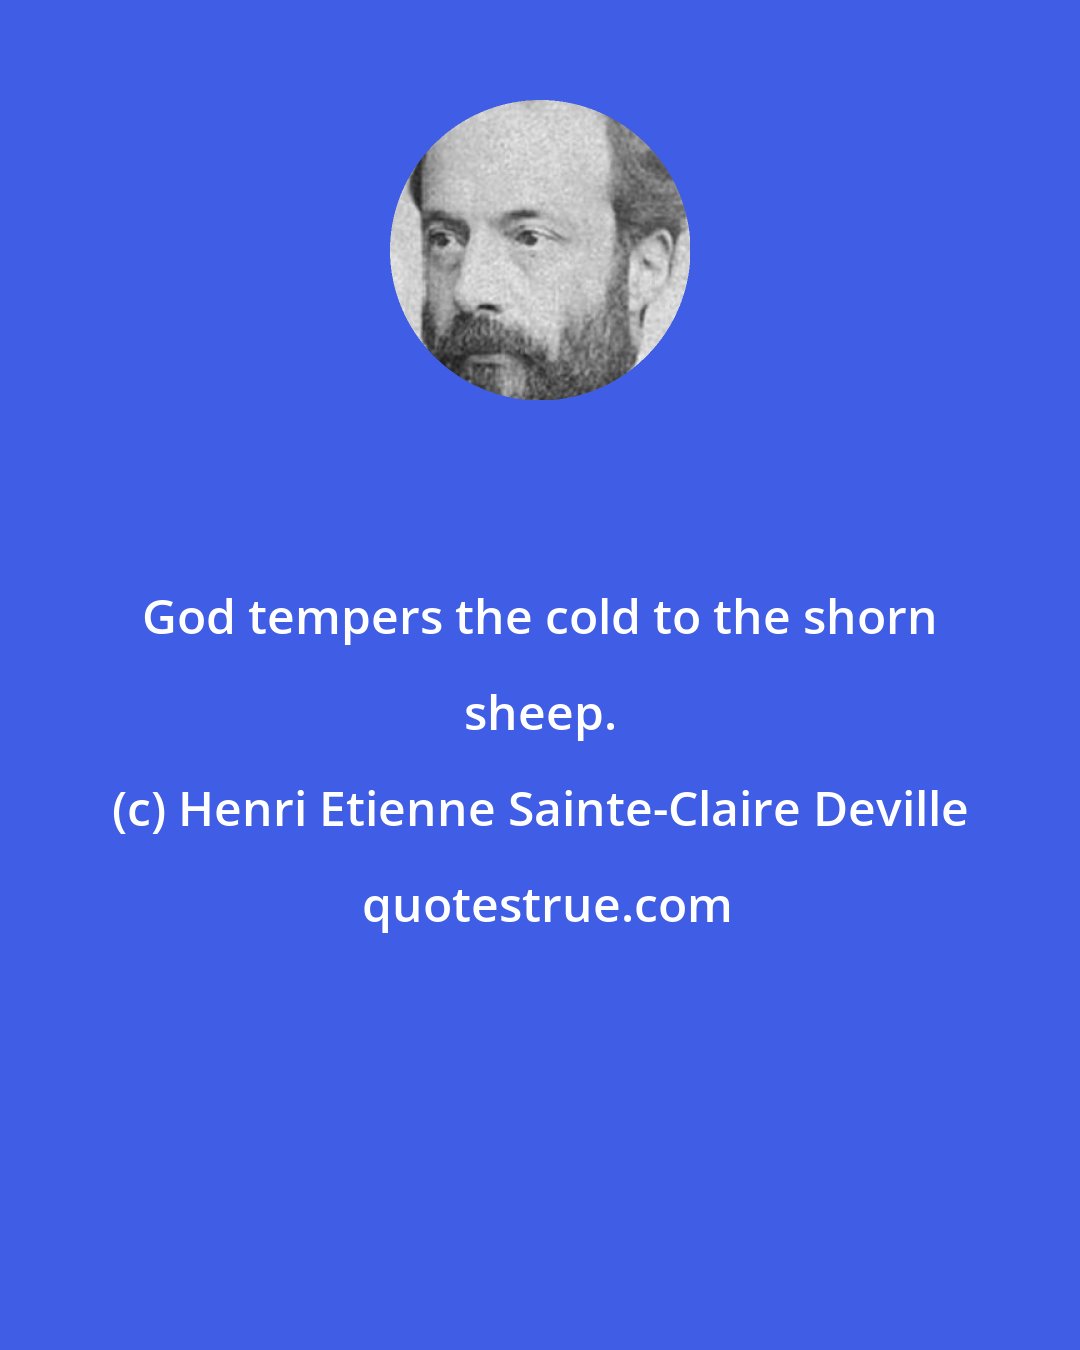 Henri Etienne Sainte-Claire Deville: God tempers the cold to the shorn sheep.